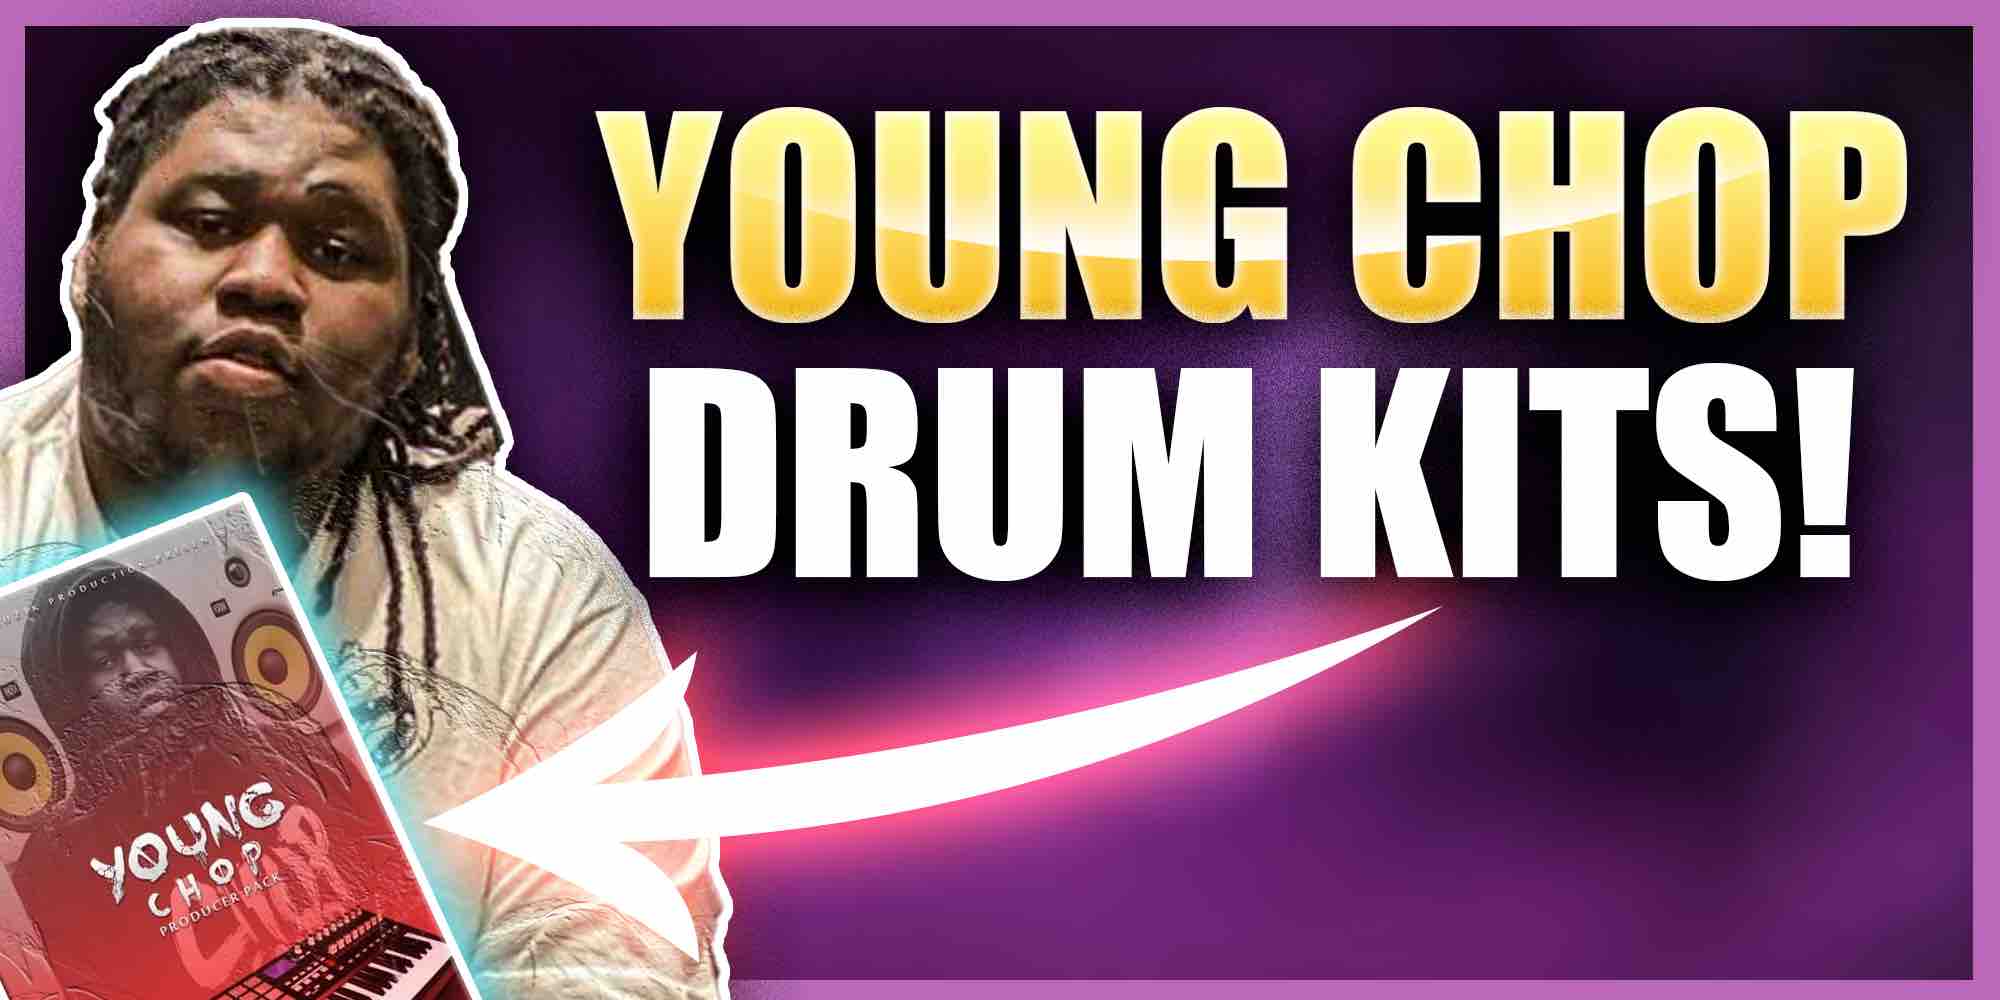 Free Young Chop Drum Kits!